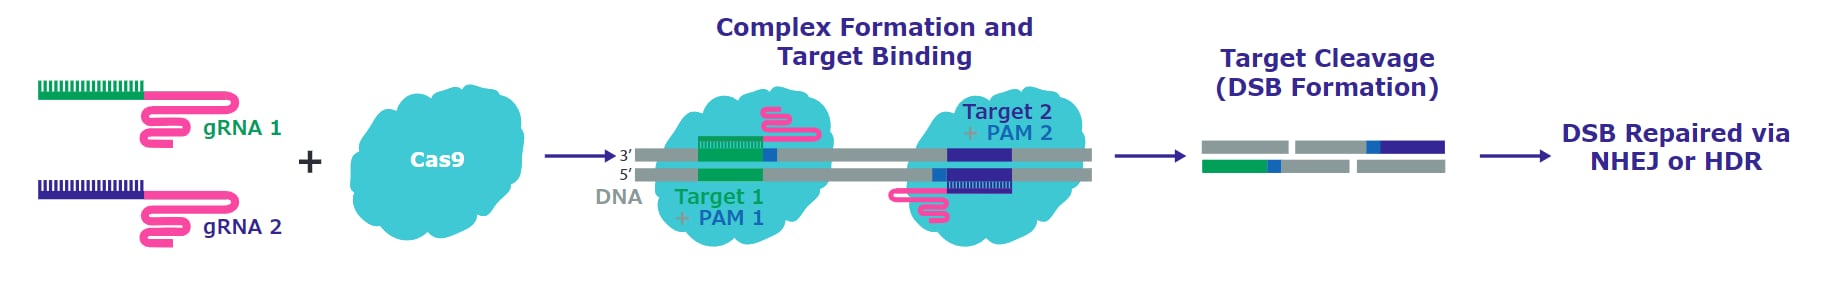 Editing with RNP Nickase systems, with only a single active cutting domain, and then delivering with proximal guide RNAs in a pair allows precise double stranded breaks, and provides hyper-specific and efficient genome editing in cell types that are more difficult to edit.